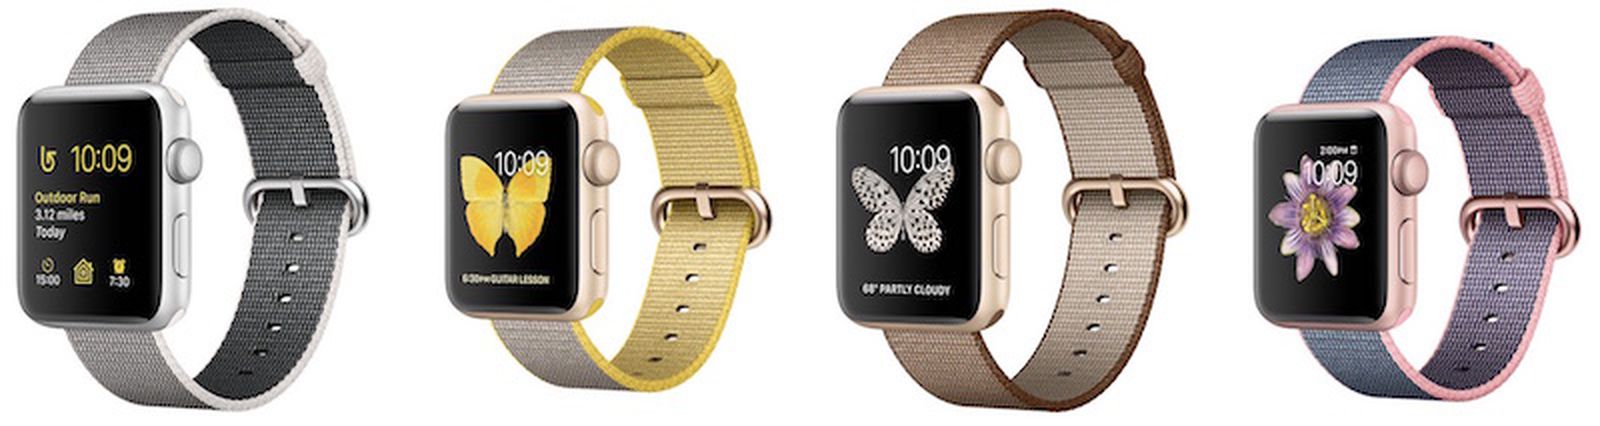 Best Buy Delaying Some Apple Watch Series 1 Pre-Orders to Mid-October